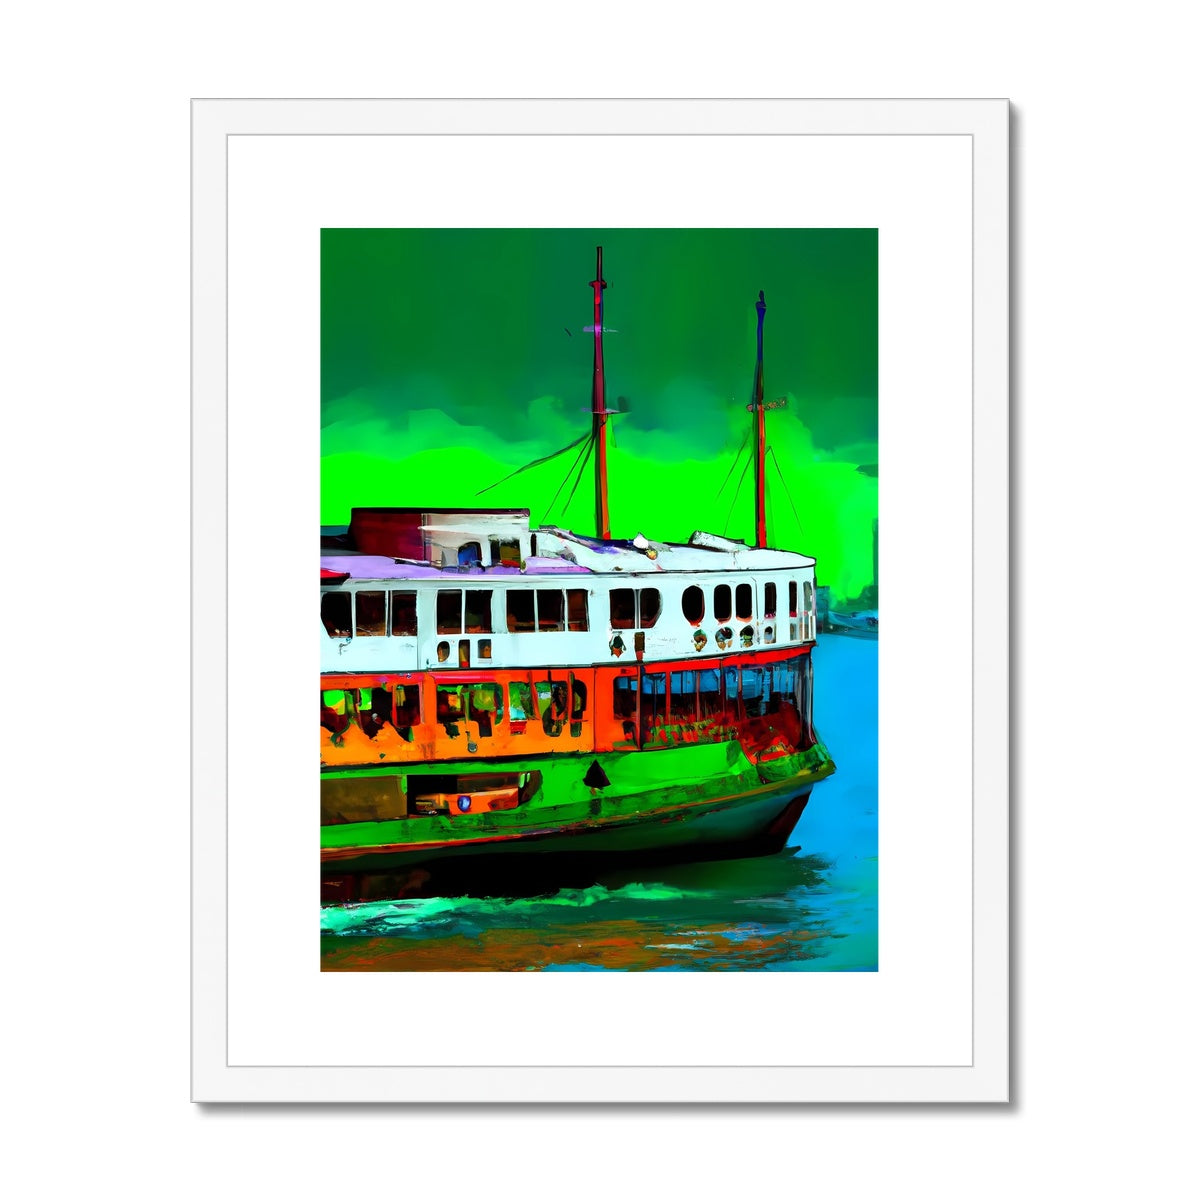 Hong Kong Impressions - Star Ferry Framed & Mounted Print